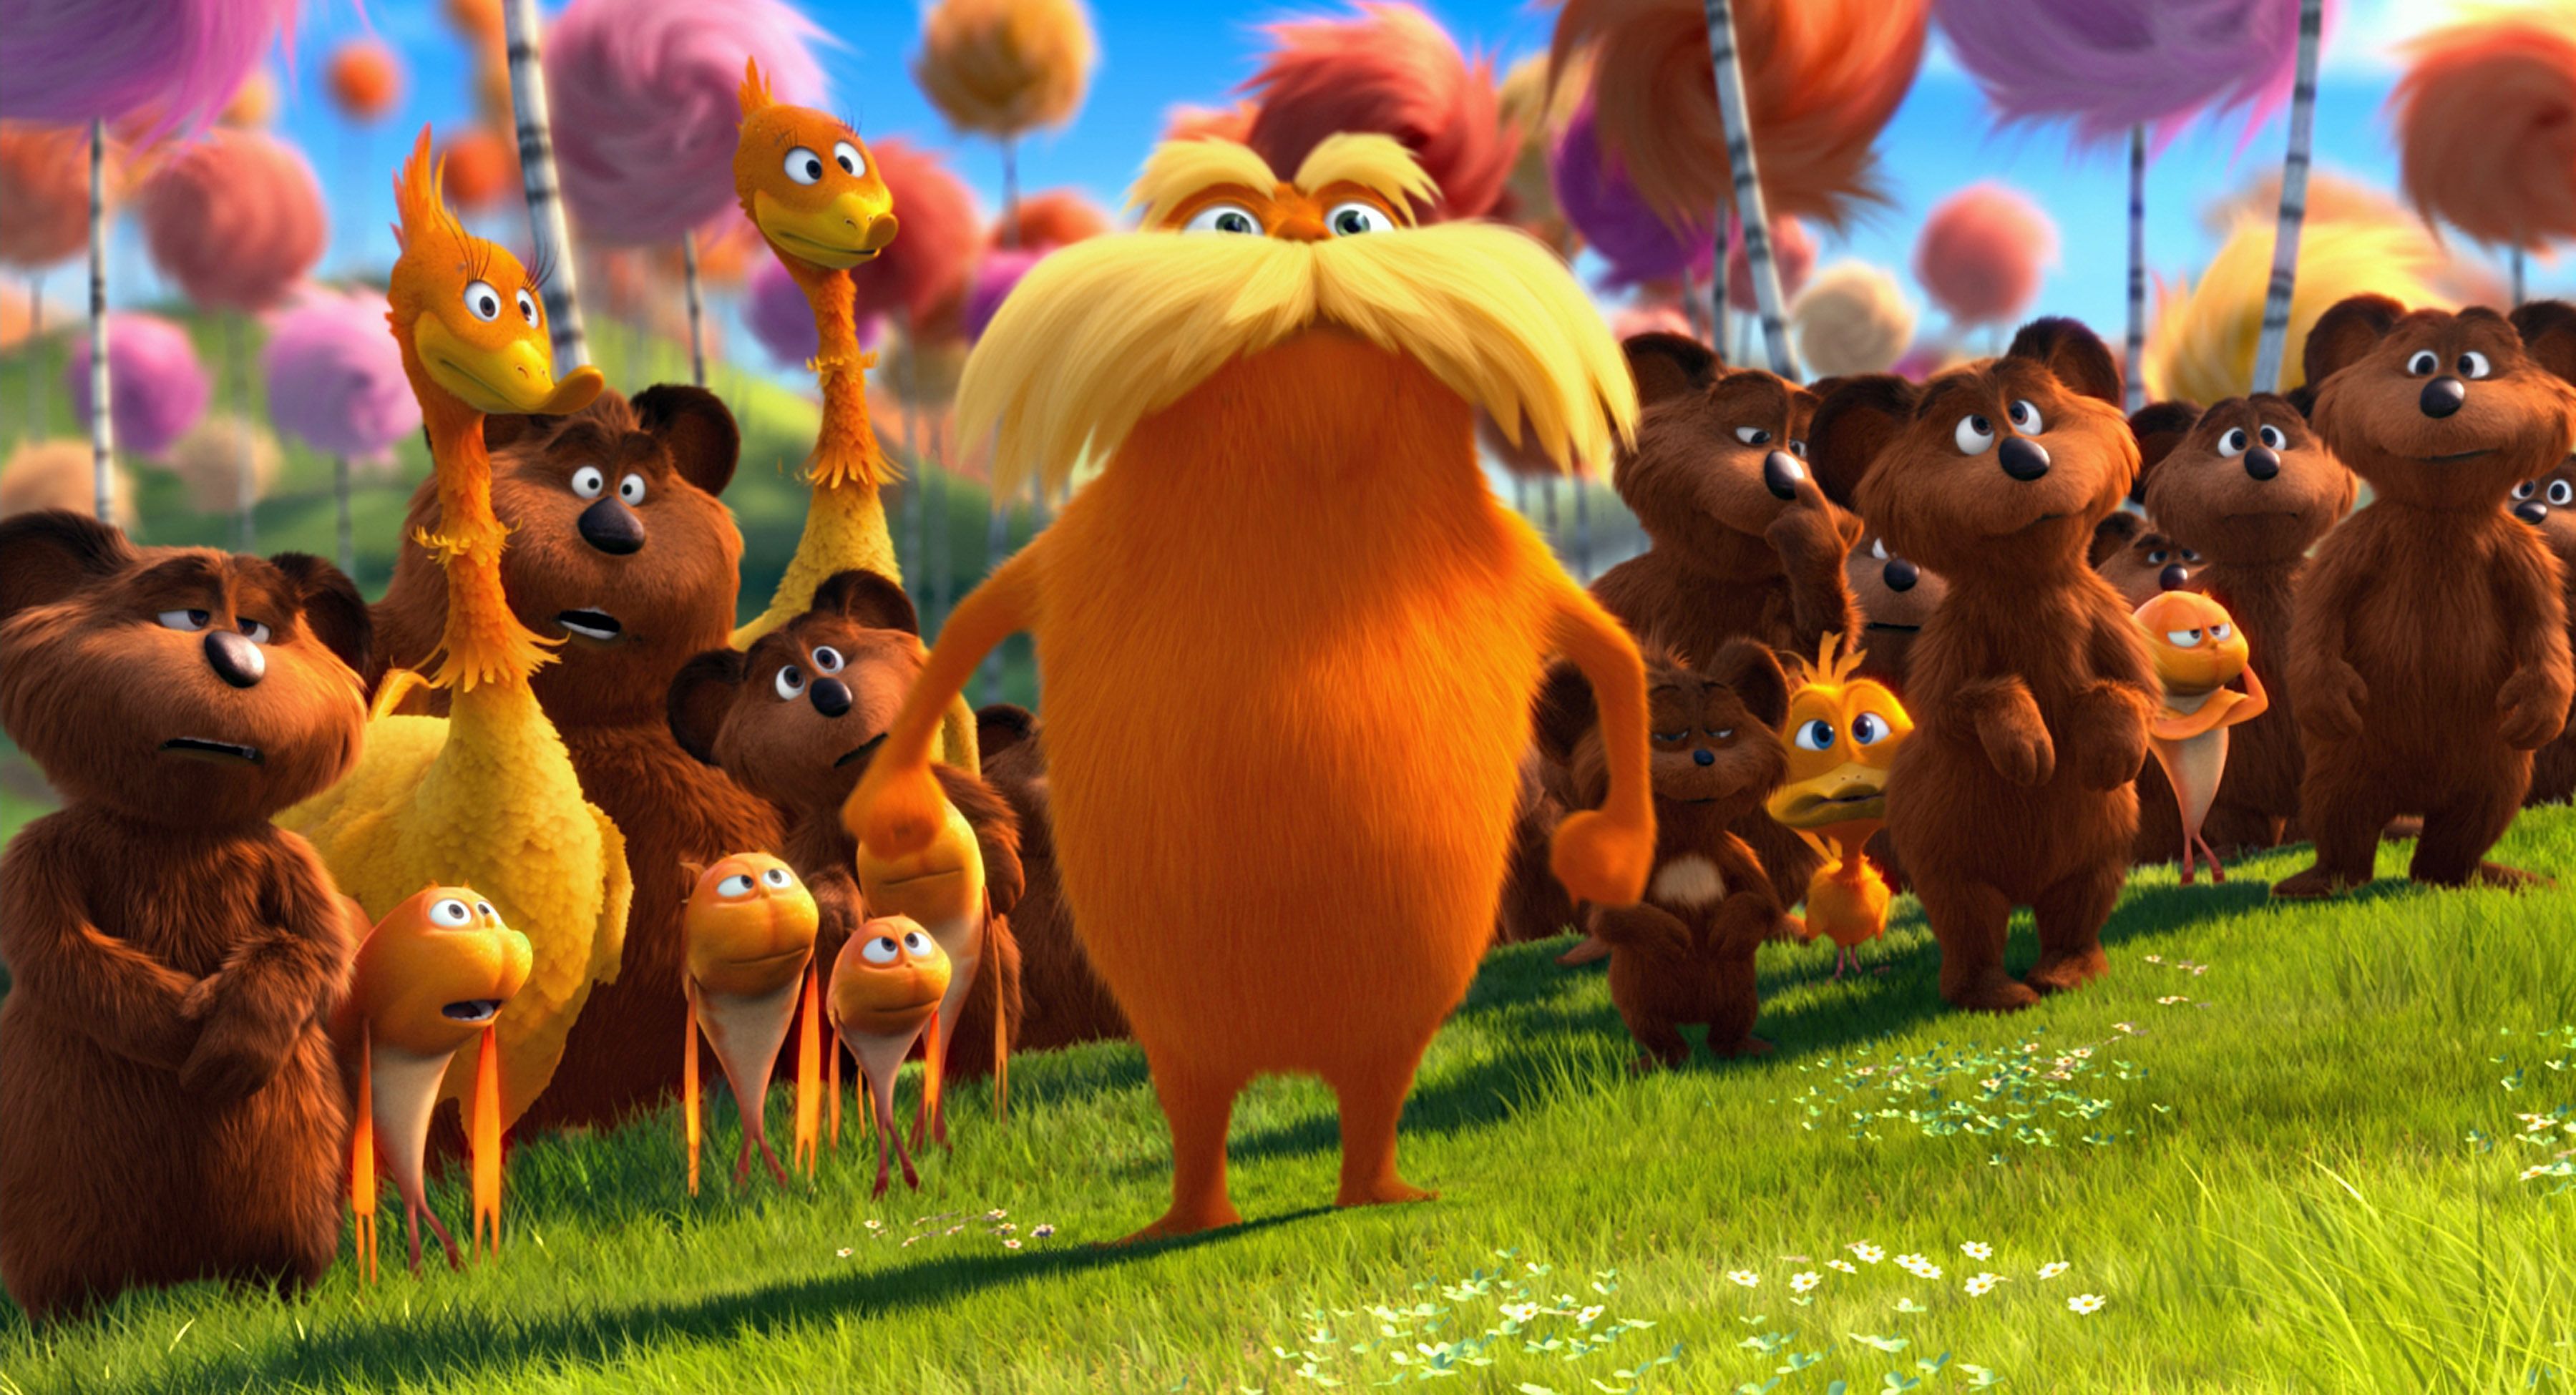 _CEOs will finally start thinking about the Lorax_